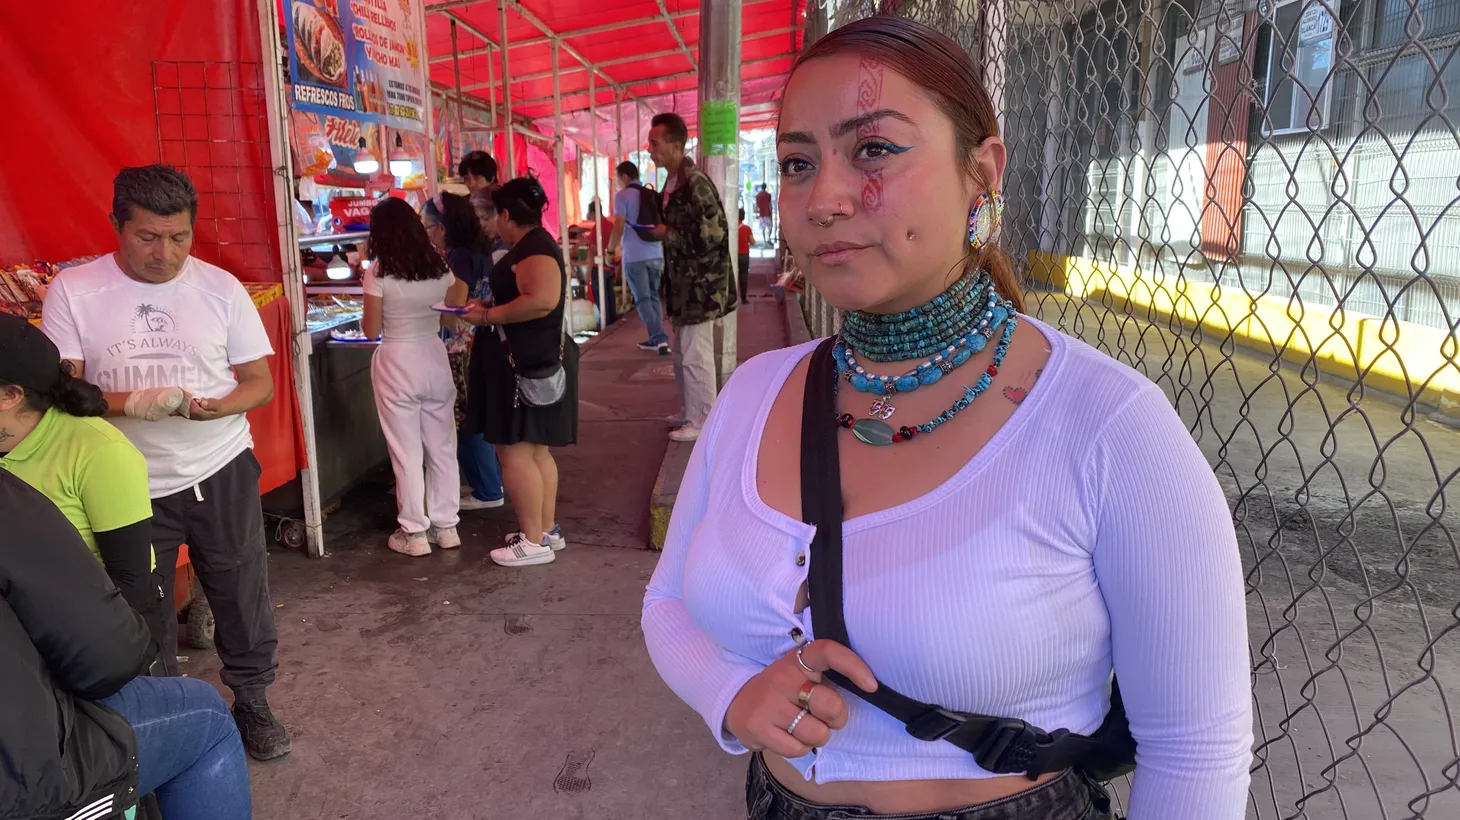 Tlahui González, a jewelry maker from Boyle Heights, first visited Mexico City five years ago to study traditional dance. She then settled permanently there because the economics allowed her to spend more time with her son.